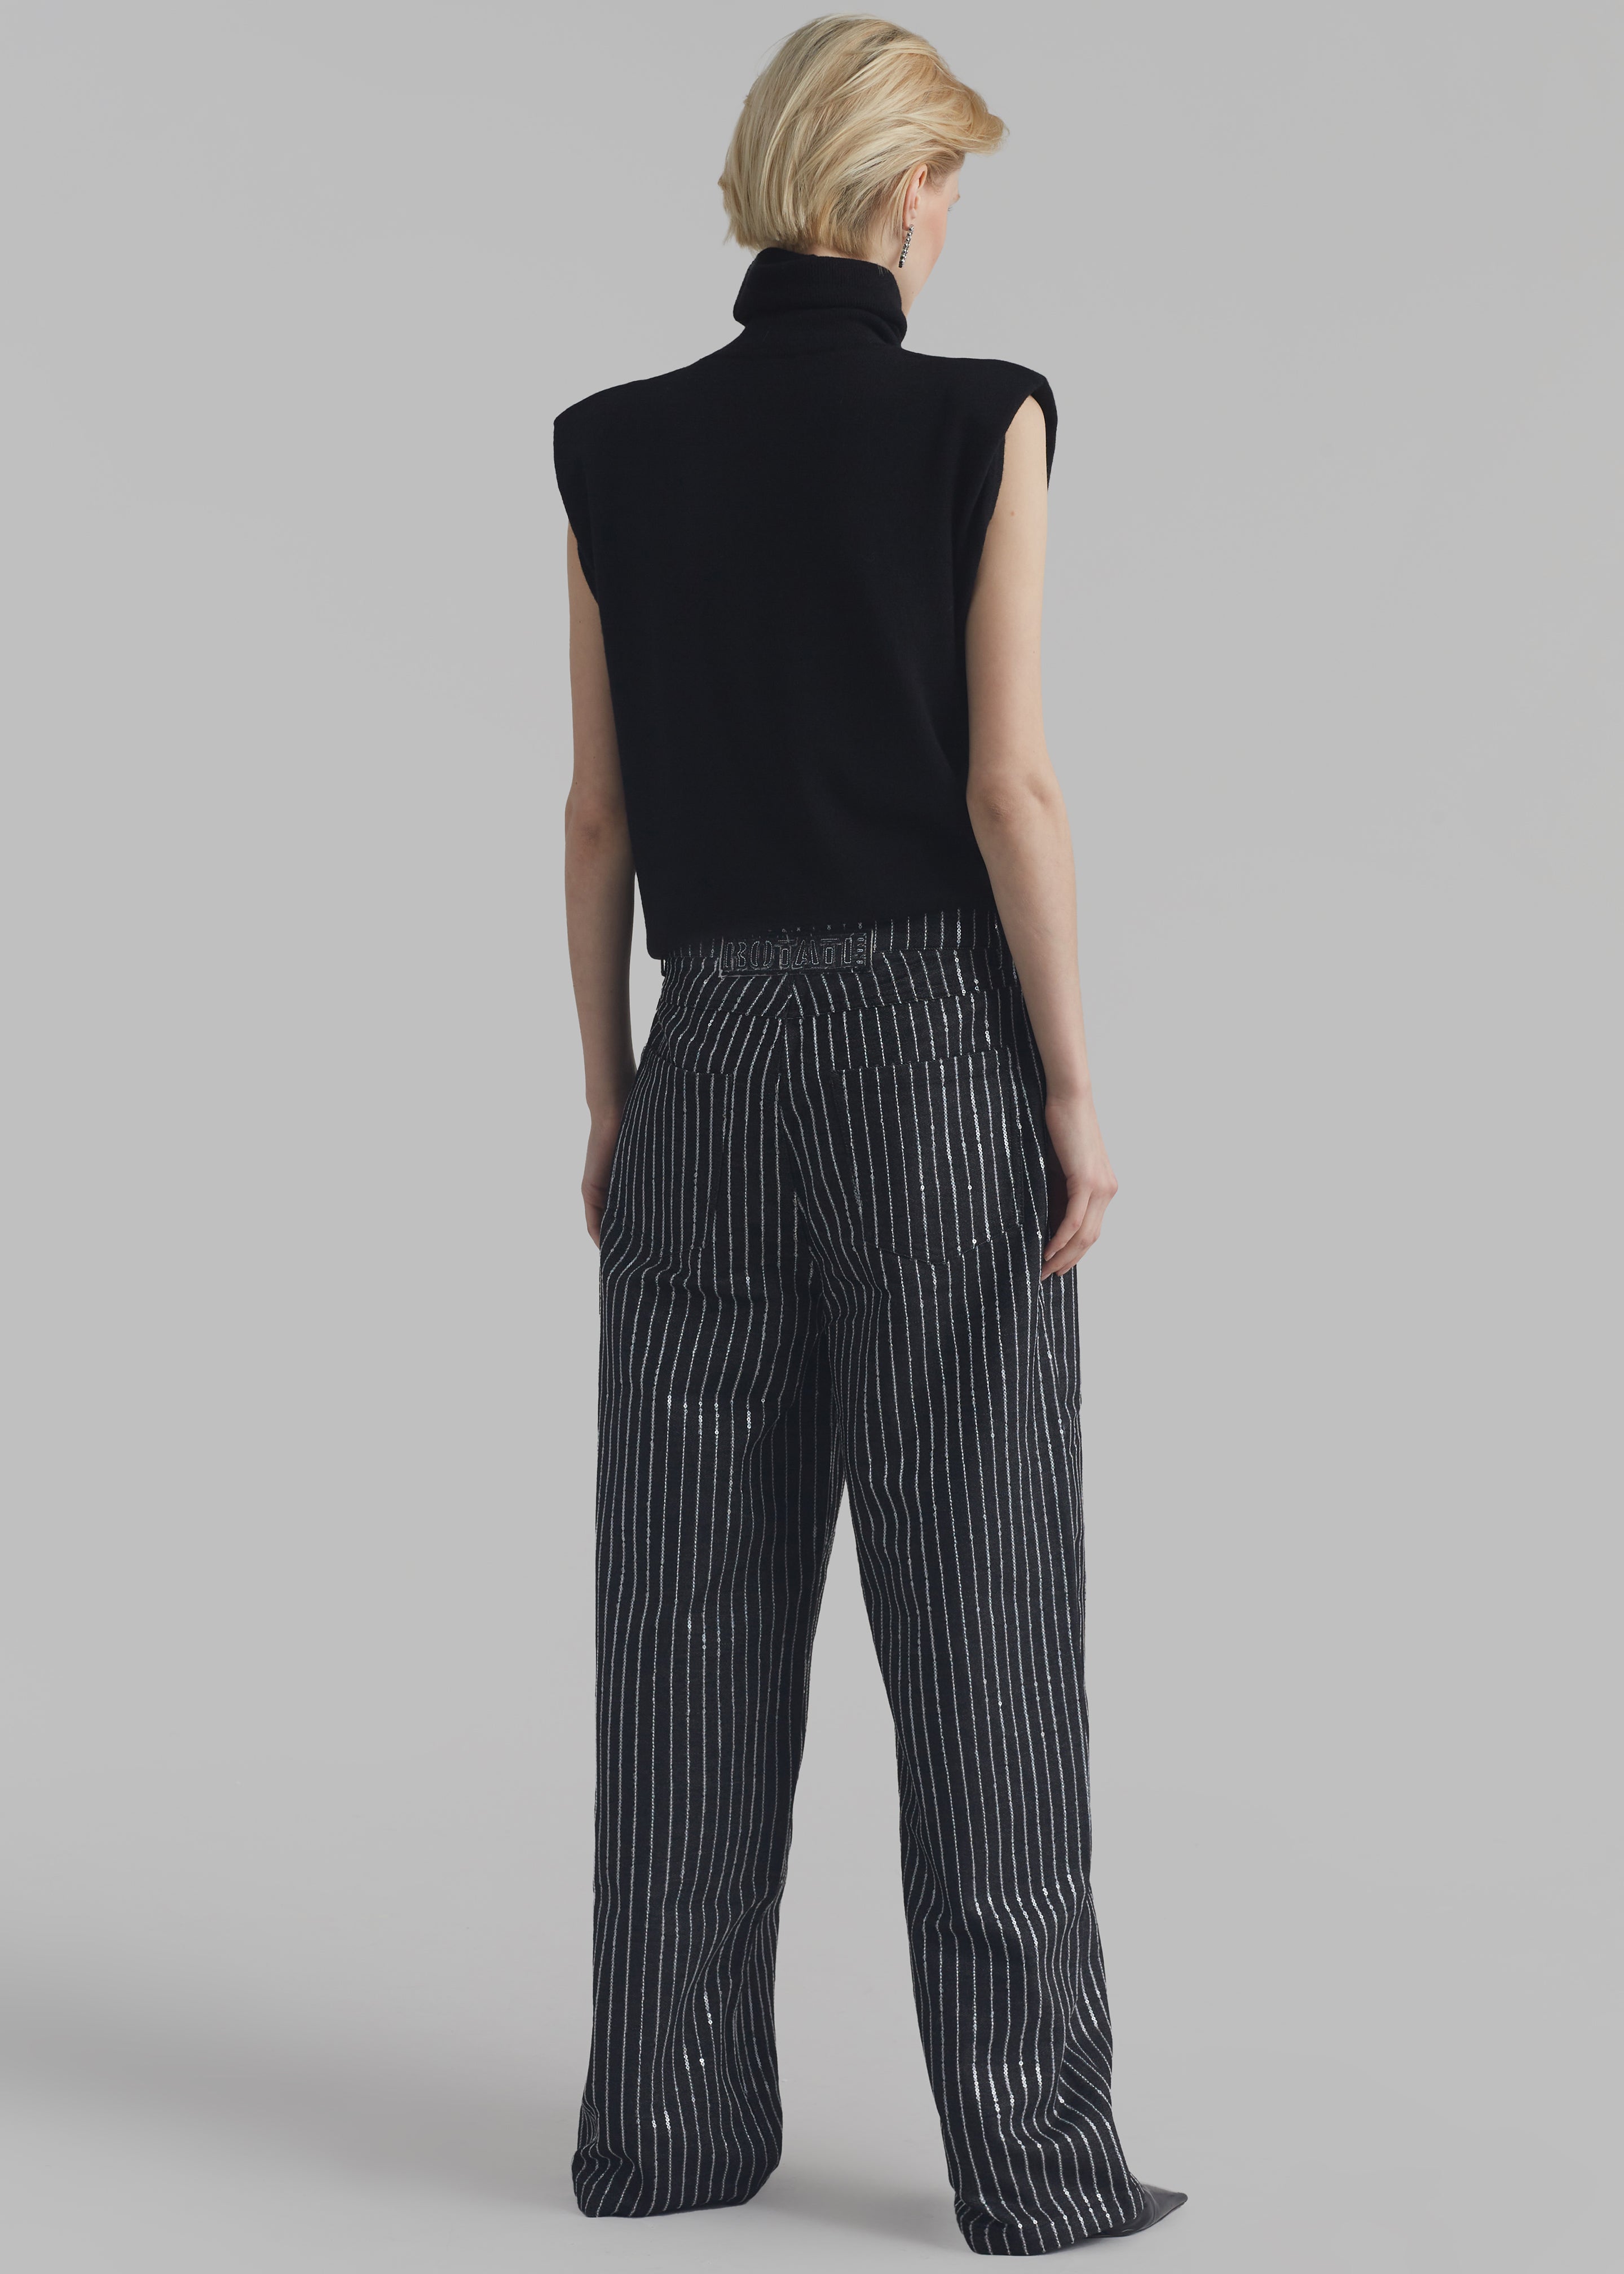 Rotate Sequin Twill Wide Pants - Black - 7